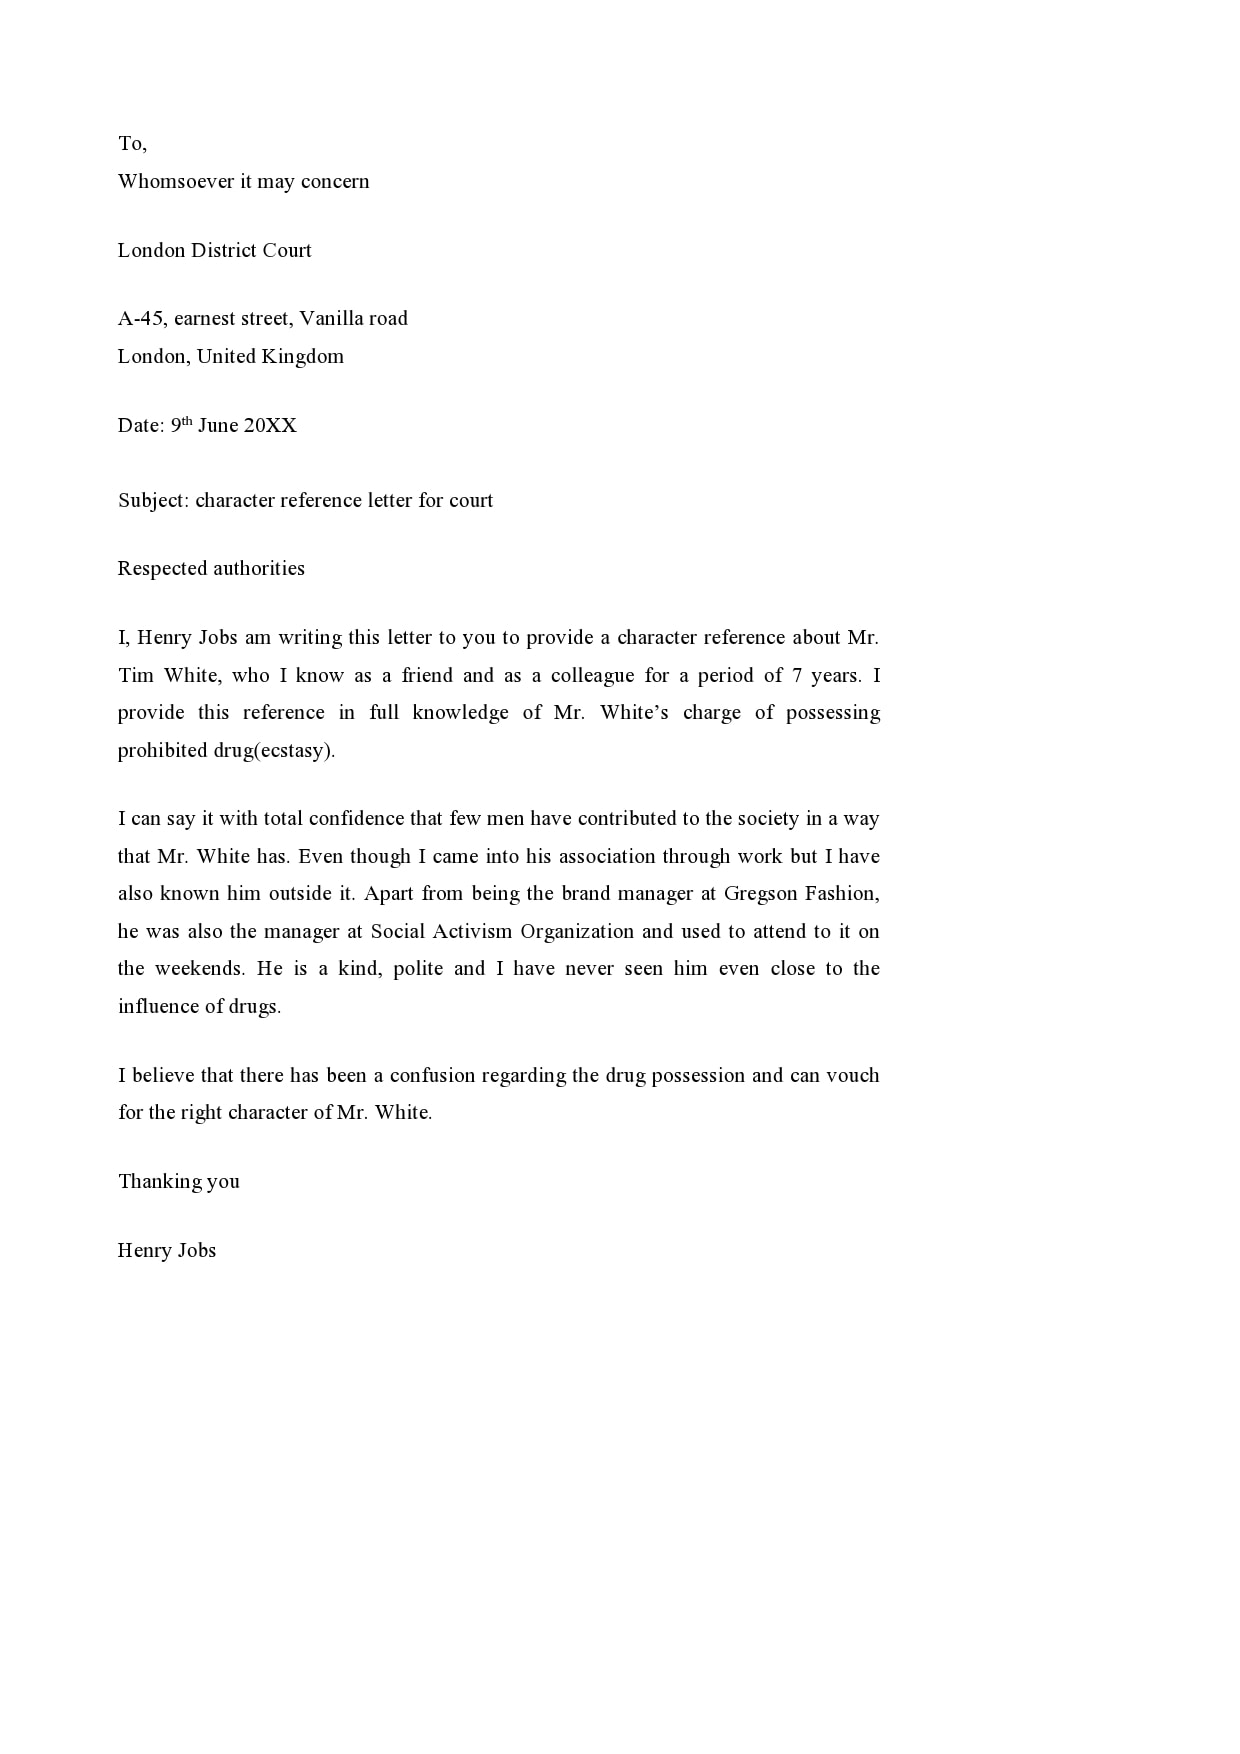 Friend Of The Court Letter Template from templatearchive.com